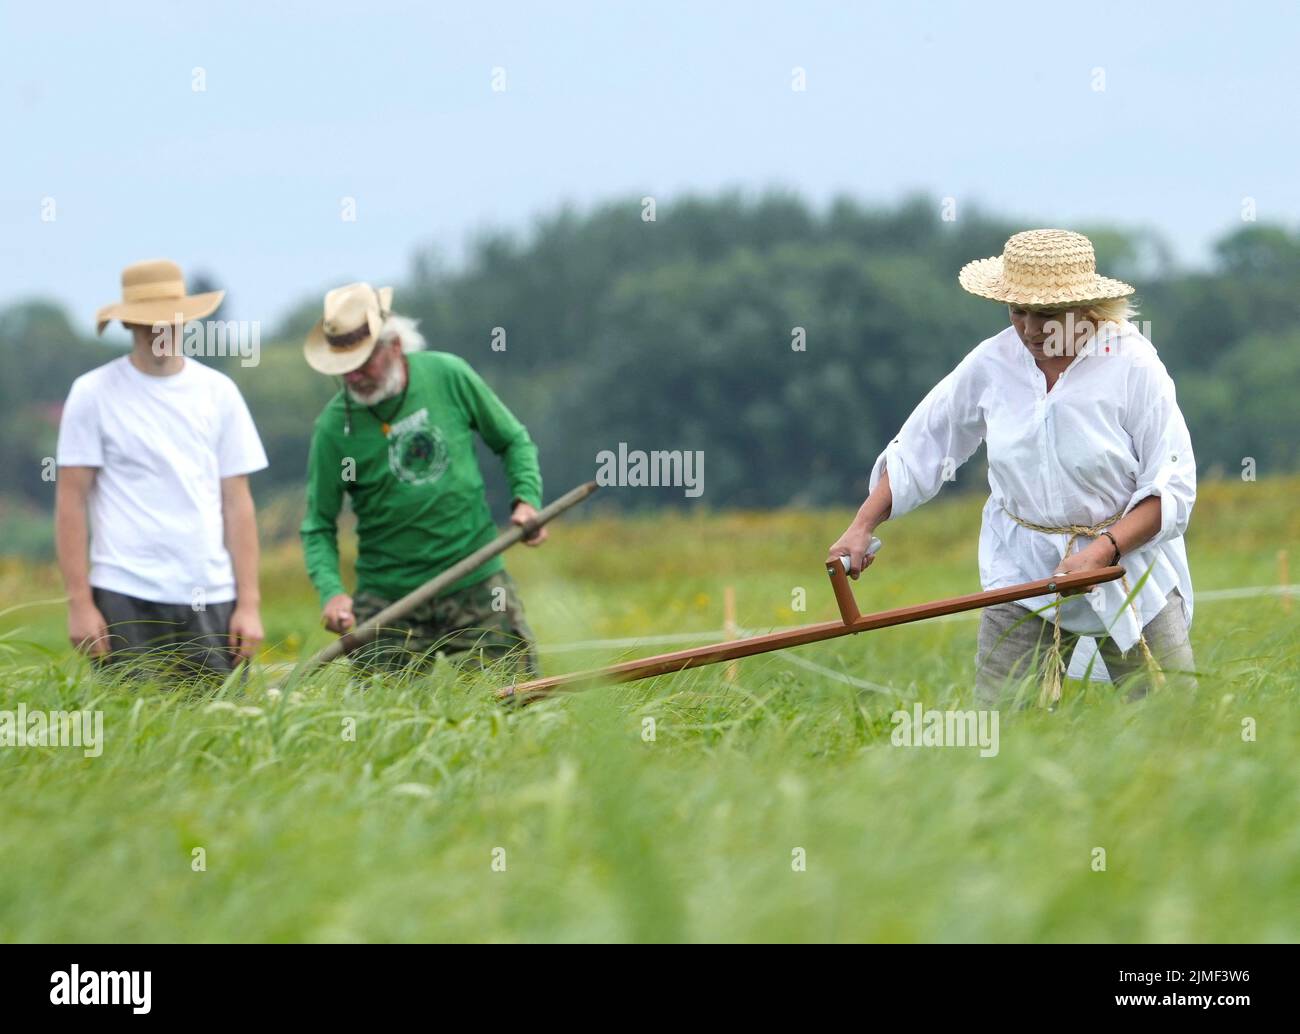 Participants compete during Lithuanian mowing championship to cut down grass using scythes in Rupkalviai, Lithuania  August 6, 2022. REUTERS/Ints Kalnins Stock Photo